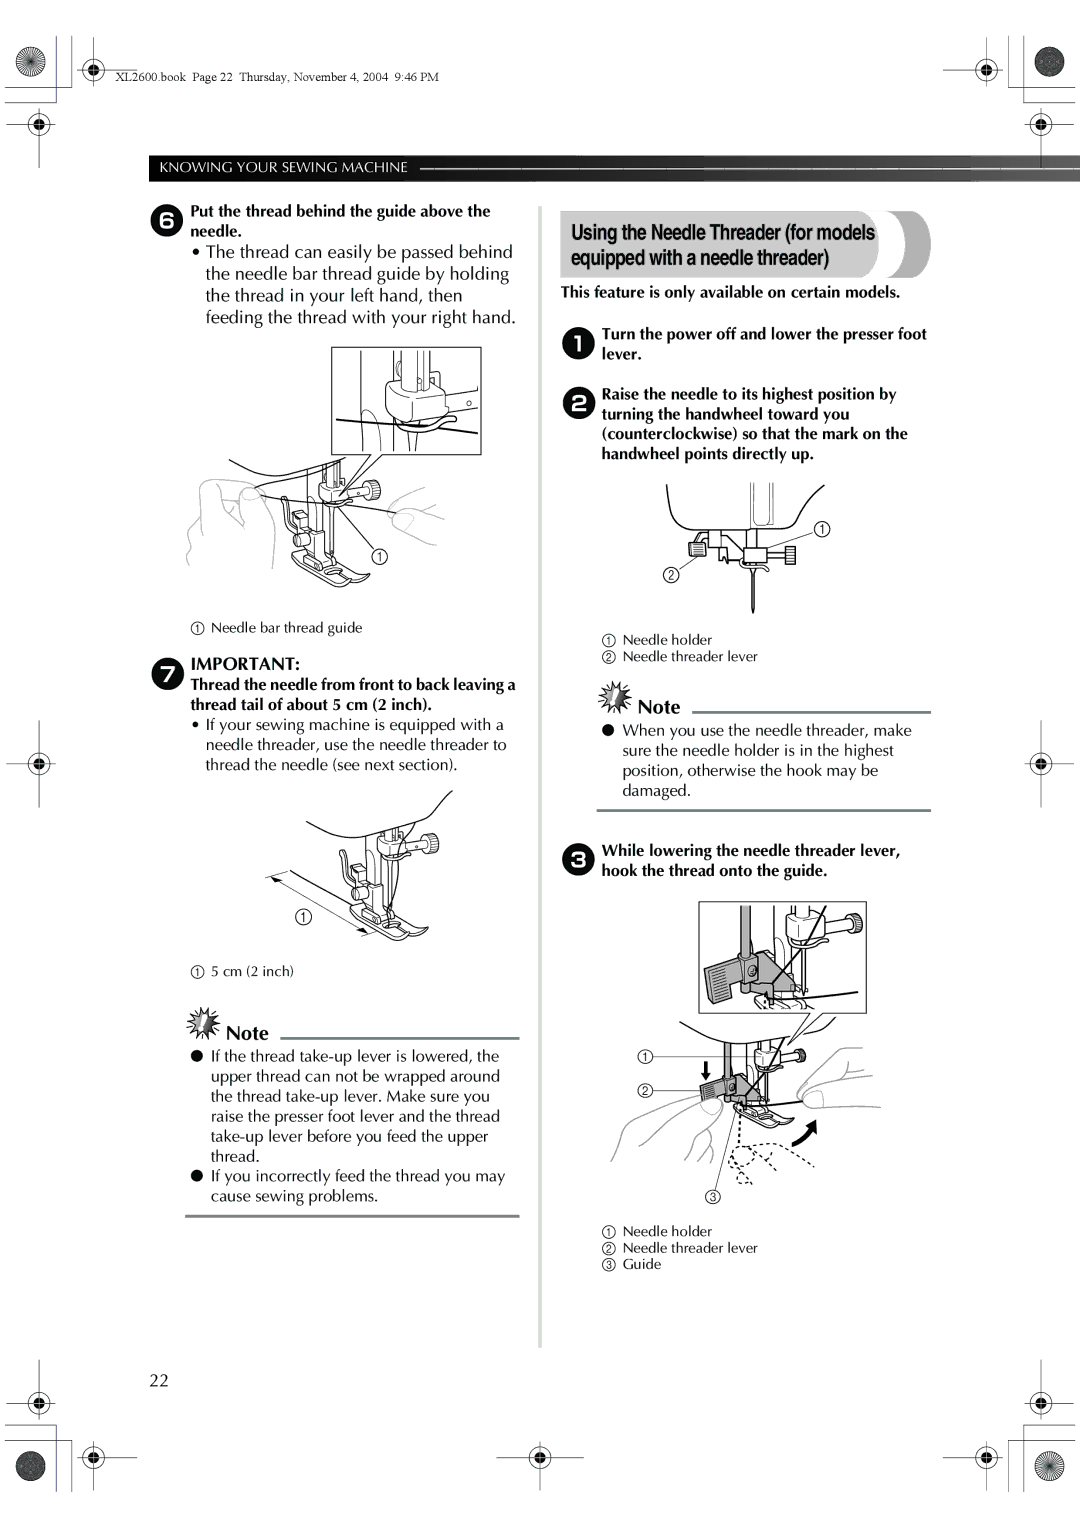 Brother XL-3510, XL-2620, XC6771-021 operation manual 6Putneedle.the thread behind the guide above 